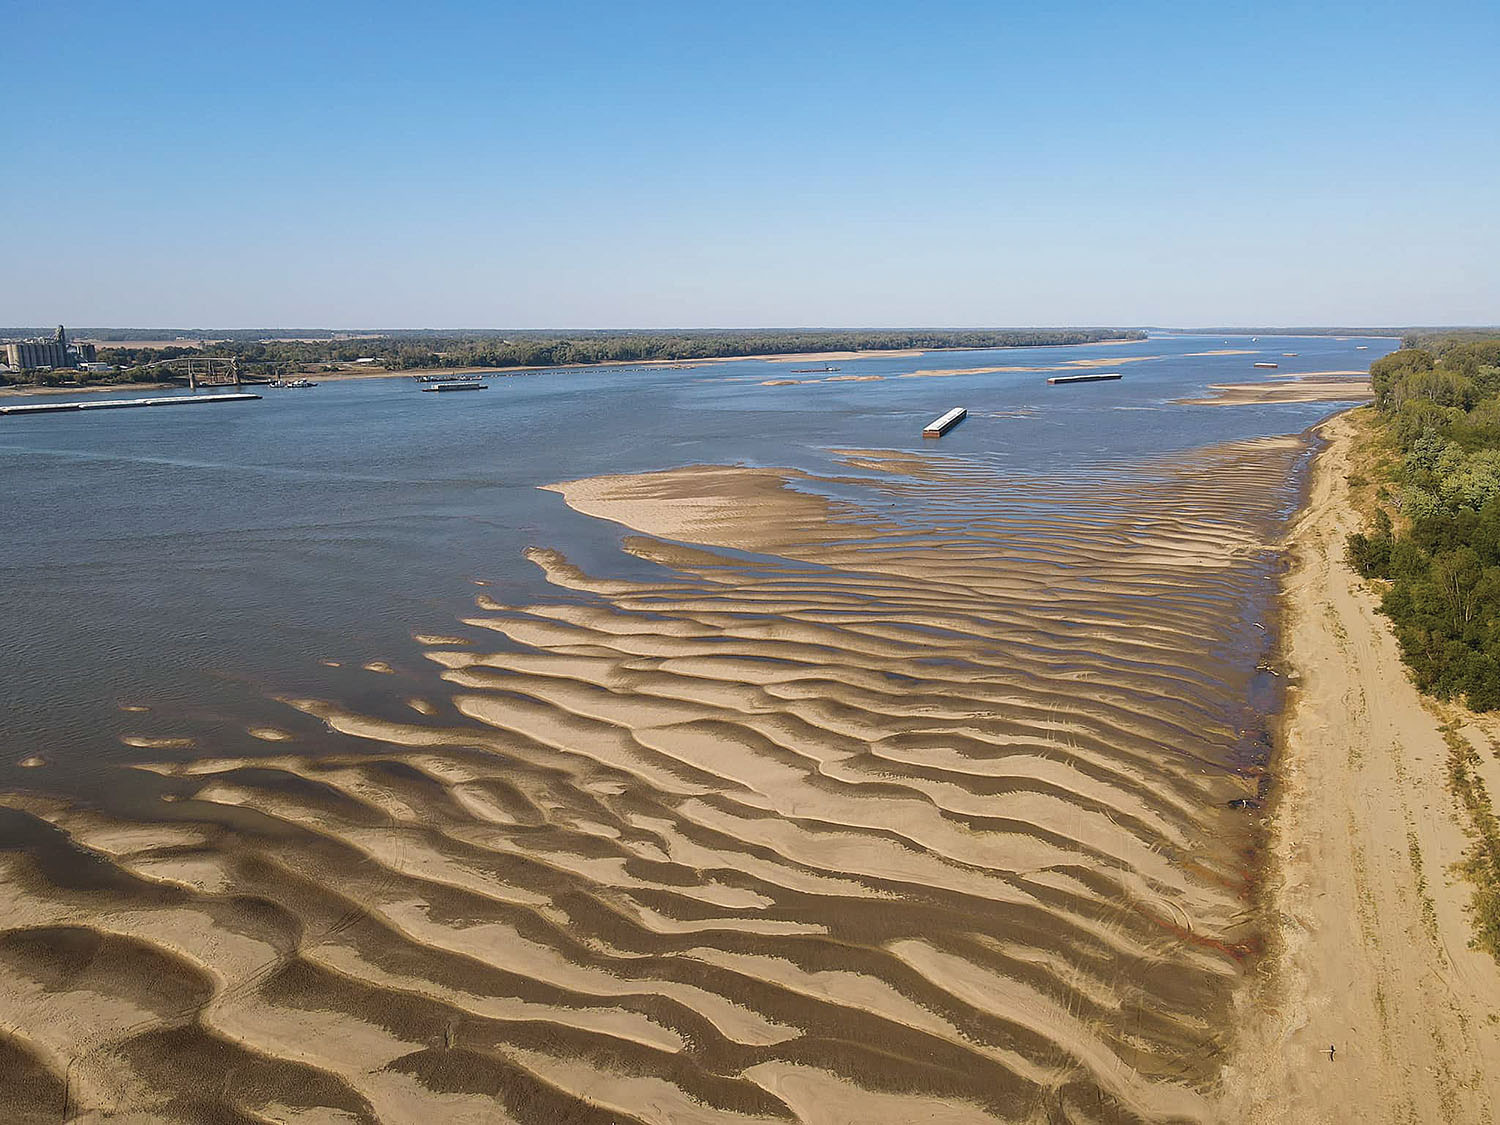 A drone photo shows low-water conditions at Ohio River Mile 974 near Mound City, Ill., including some of the barges that had grounded in the area recently. (Photo by Zoe Dillworth)